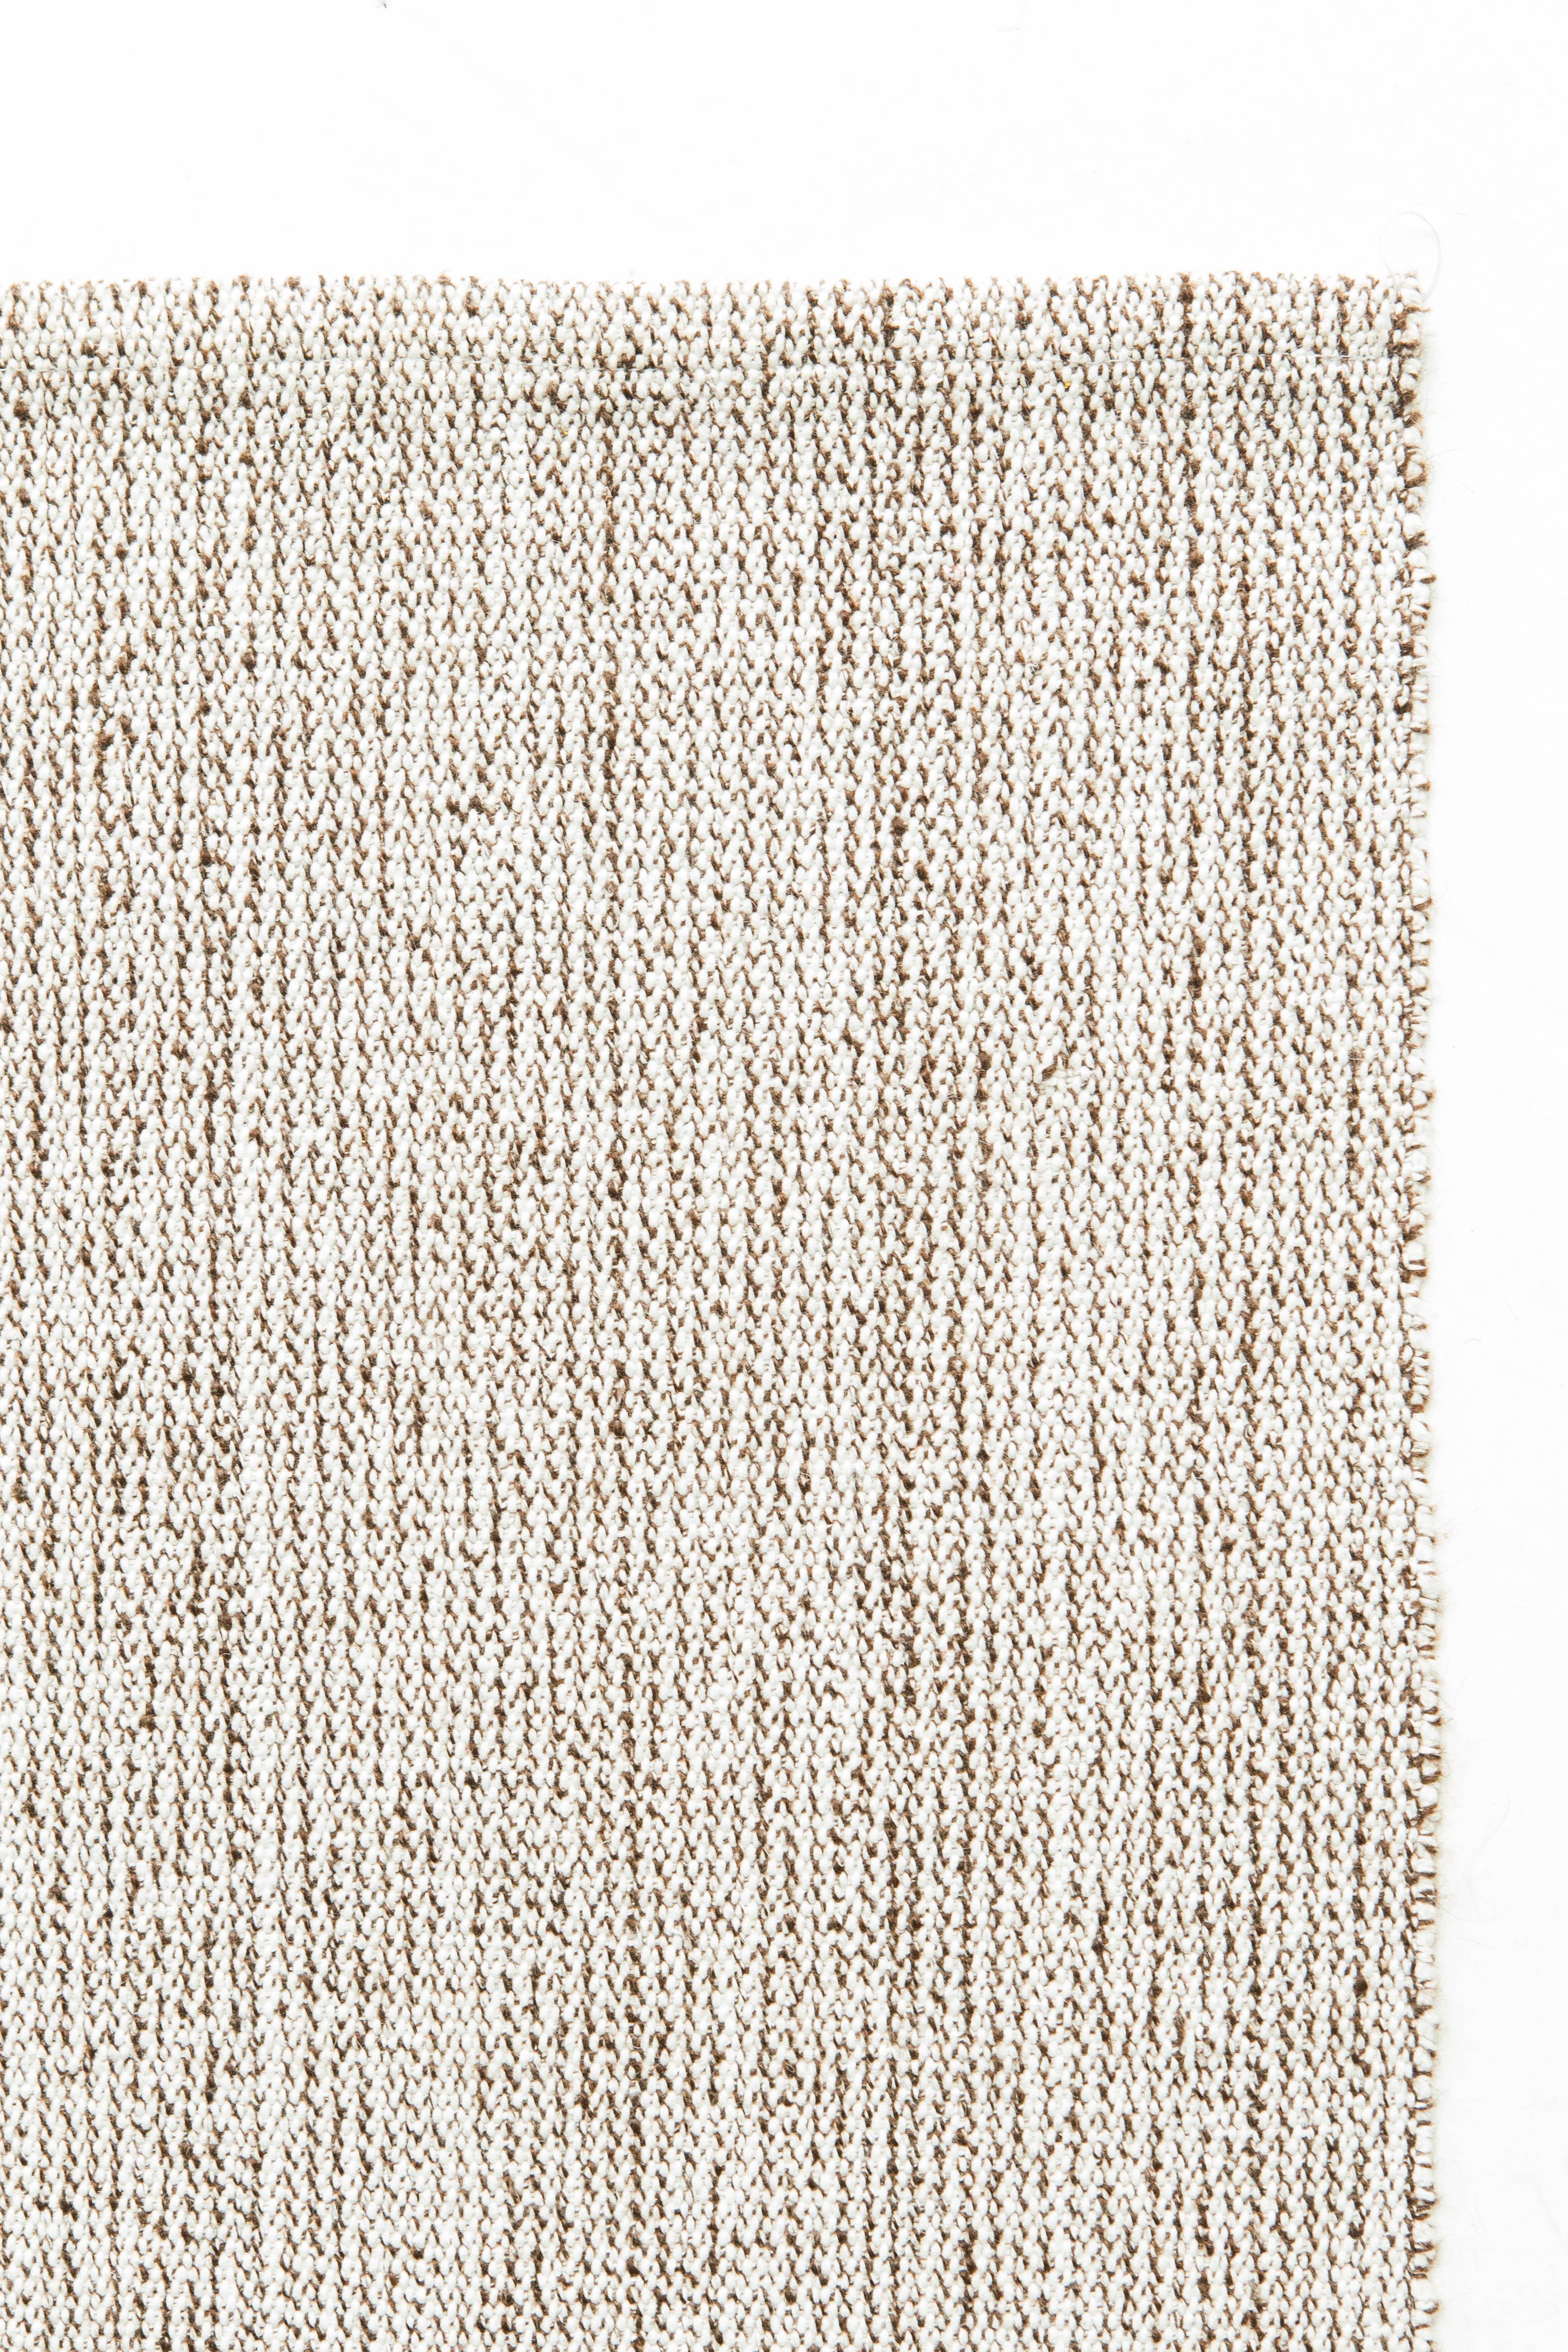 A beautiful natural wool Anatolian Turkish flat-weave. This vintage Kilim is made up of brown and ivory natural wools that create an interesting texture and vibe for any design space.


Rug number 26772
Size 6' 11